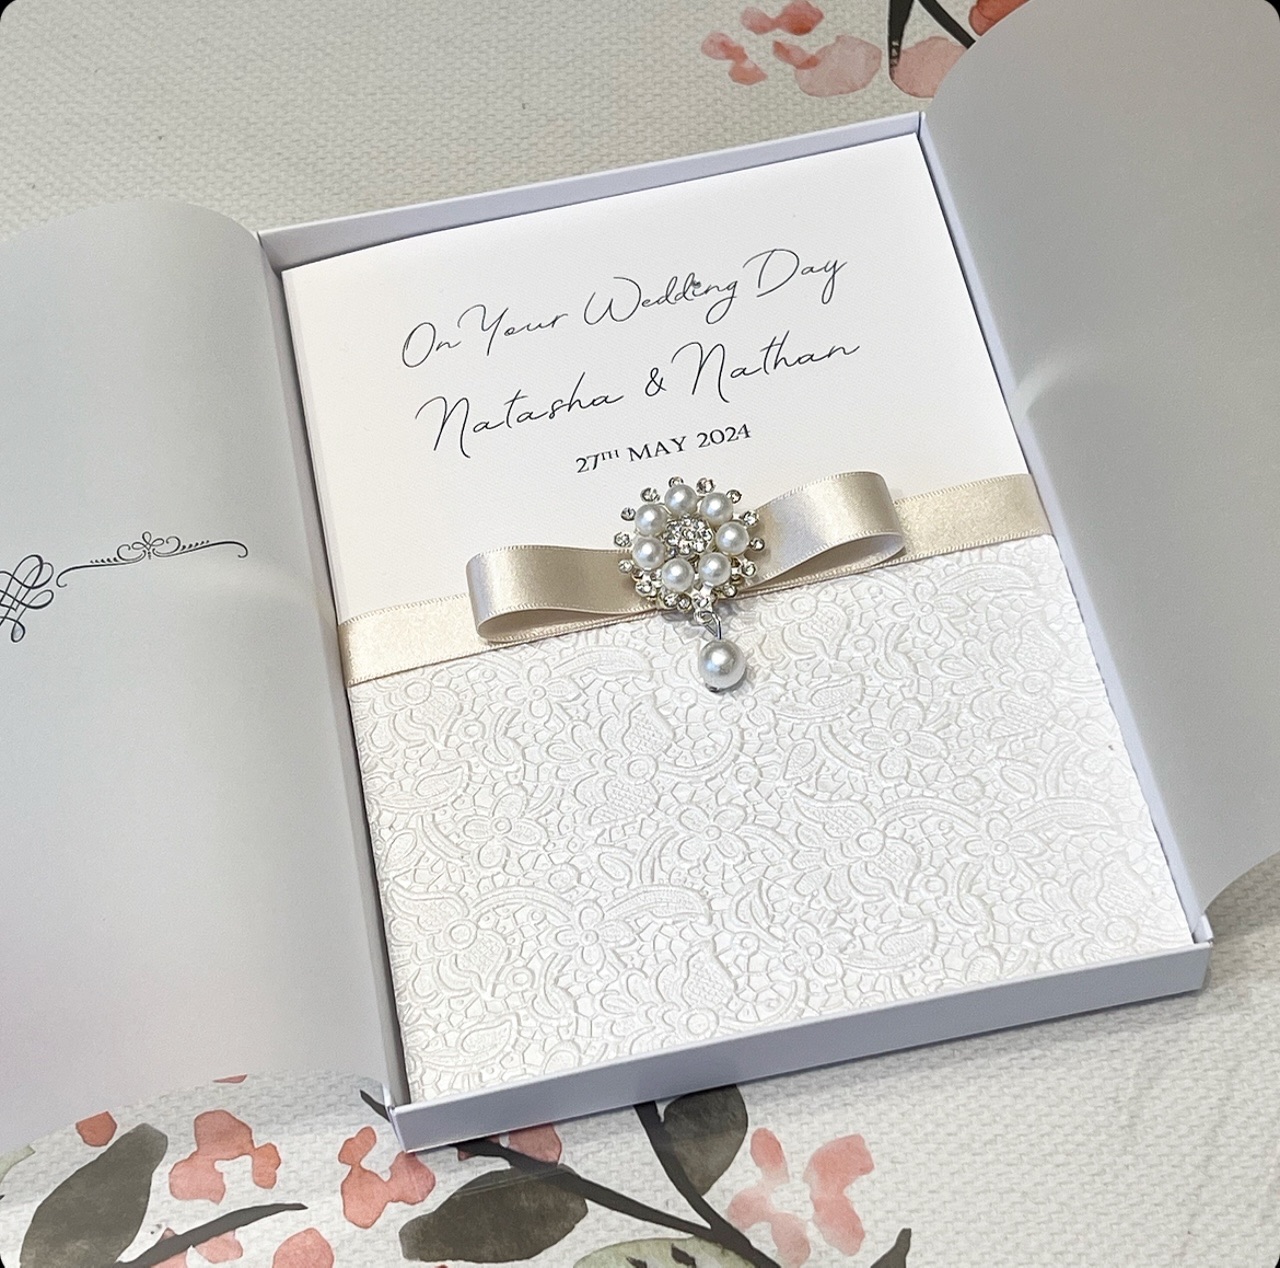 Personalised wedding day card with luxury gift box